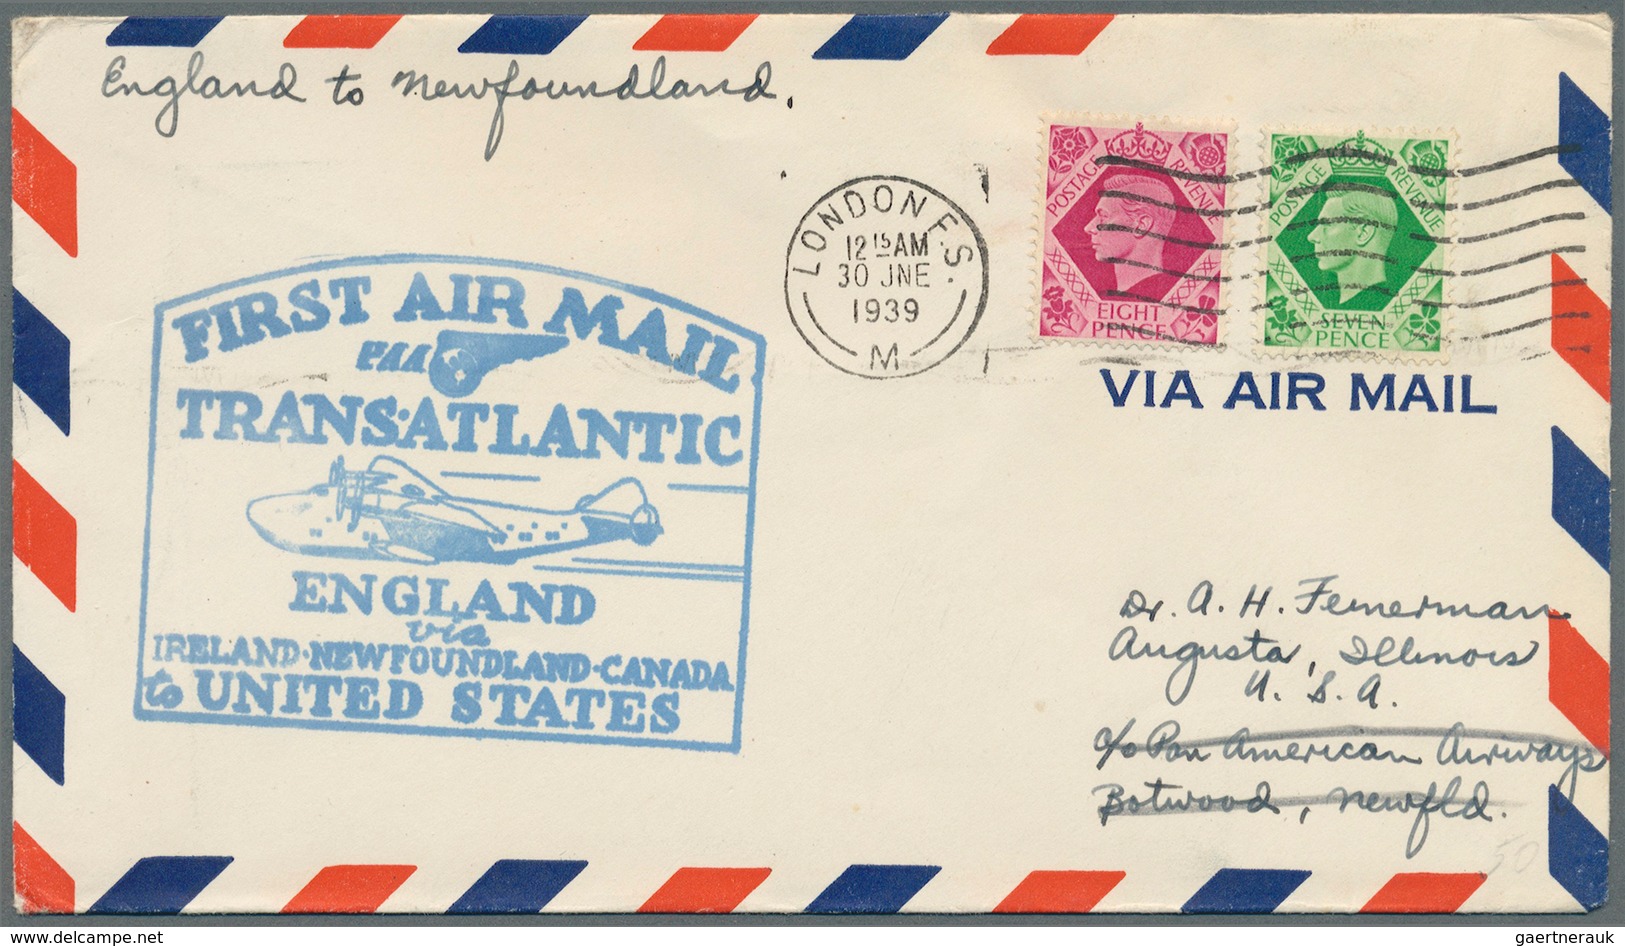 26714 Großbritannien: 1911 from, attractive lot of 49 items "AIRMAIL", first and foremost pre WWII covers